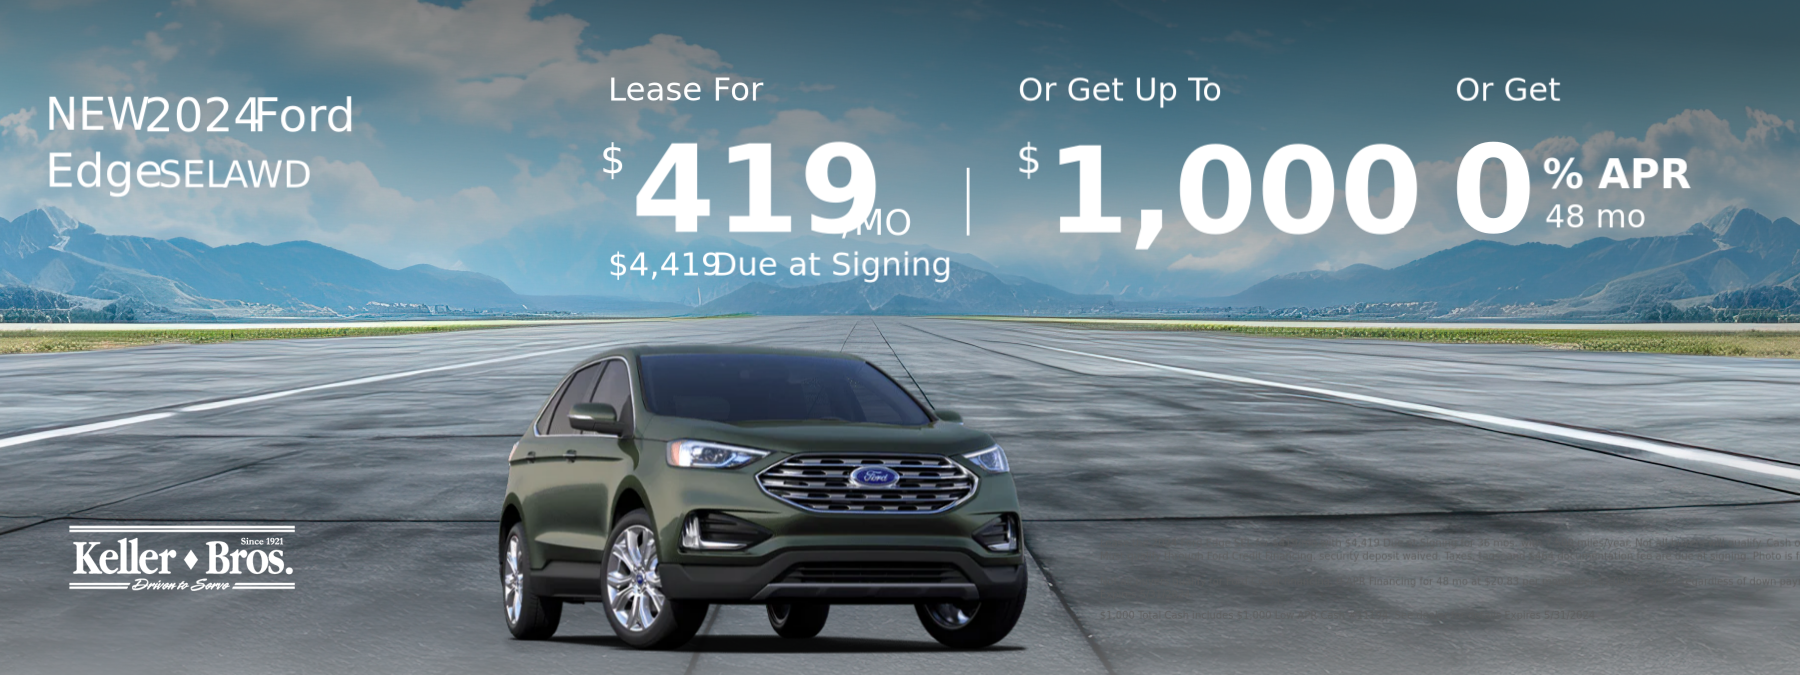 Check out these new offers of the Ford Edge!